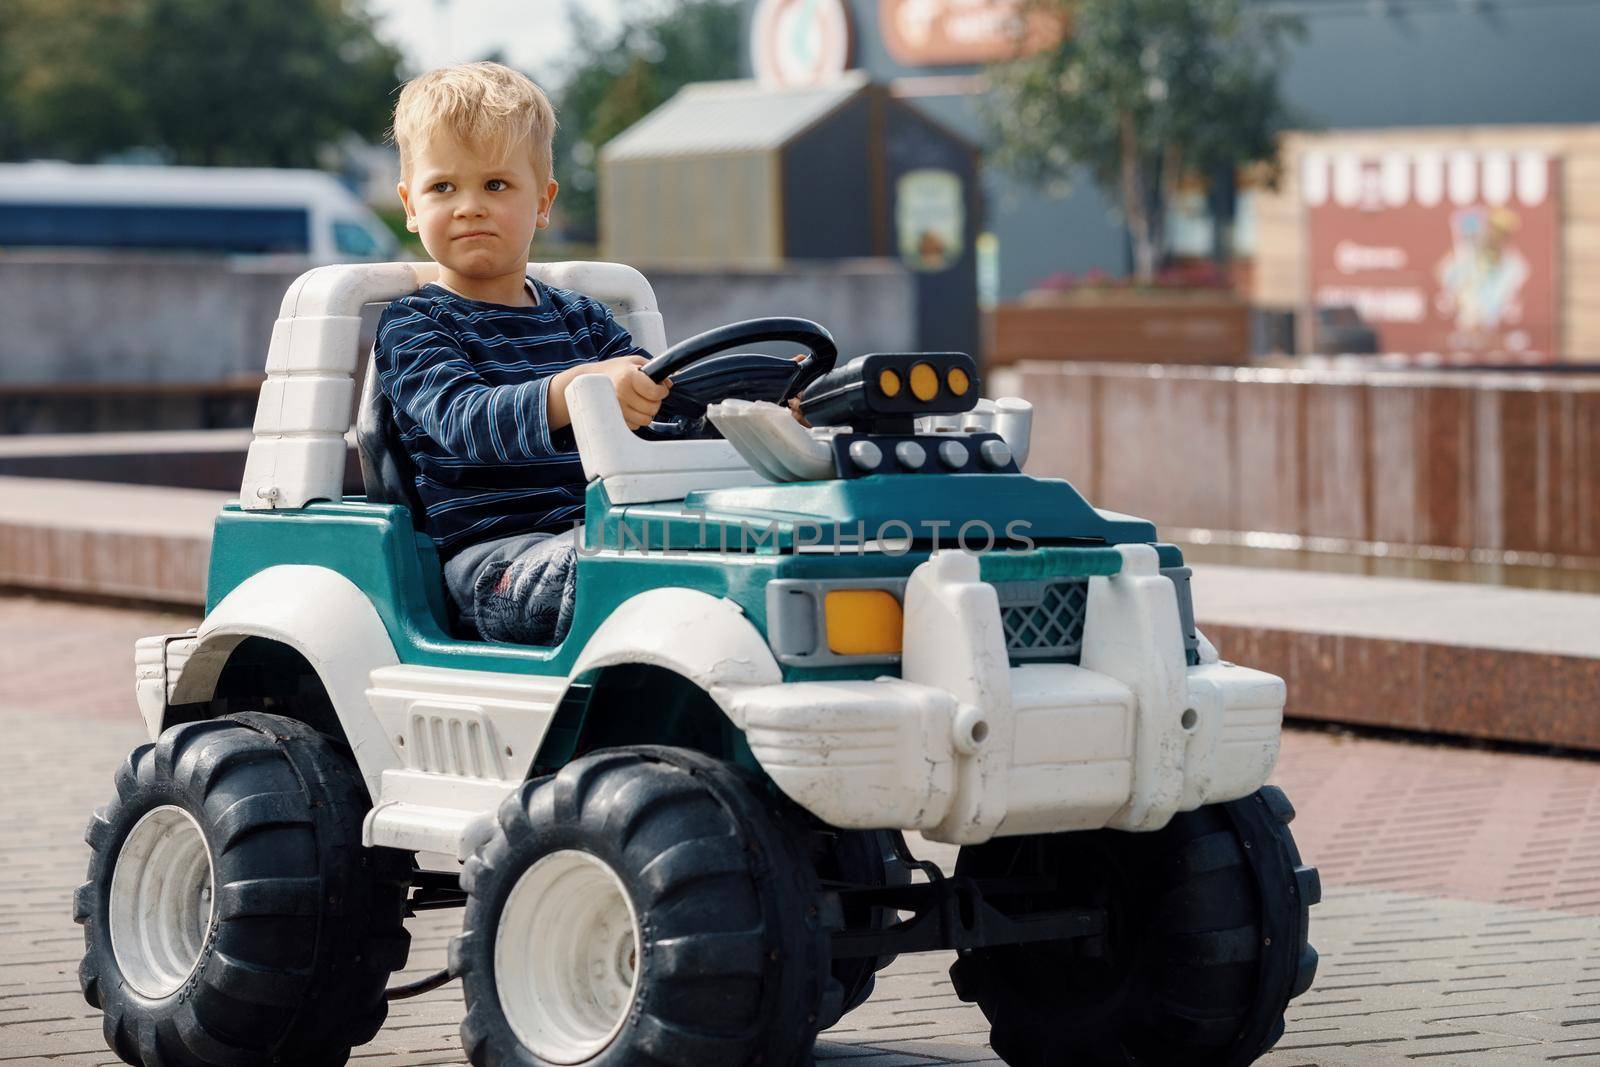 A relaxed, professional-faced cute little boy drives a large green toy electric SUV.